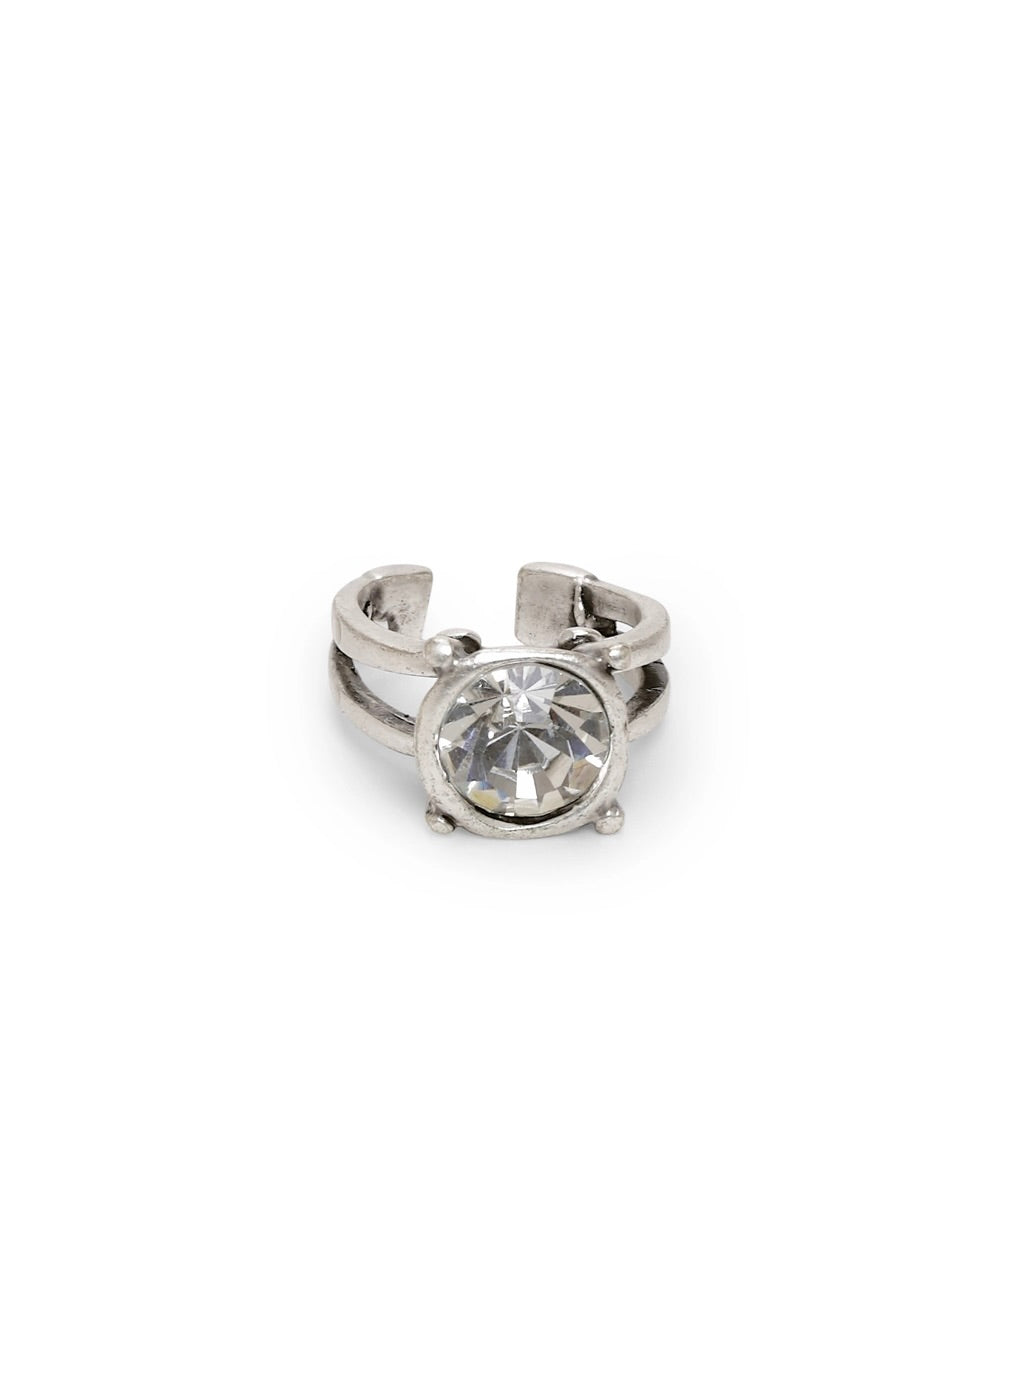 ROUND CRYSTAL ADJUSTABLE RING